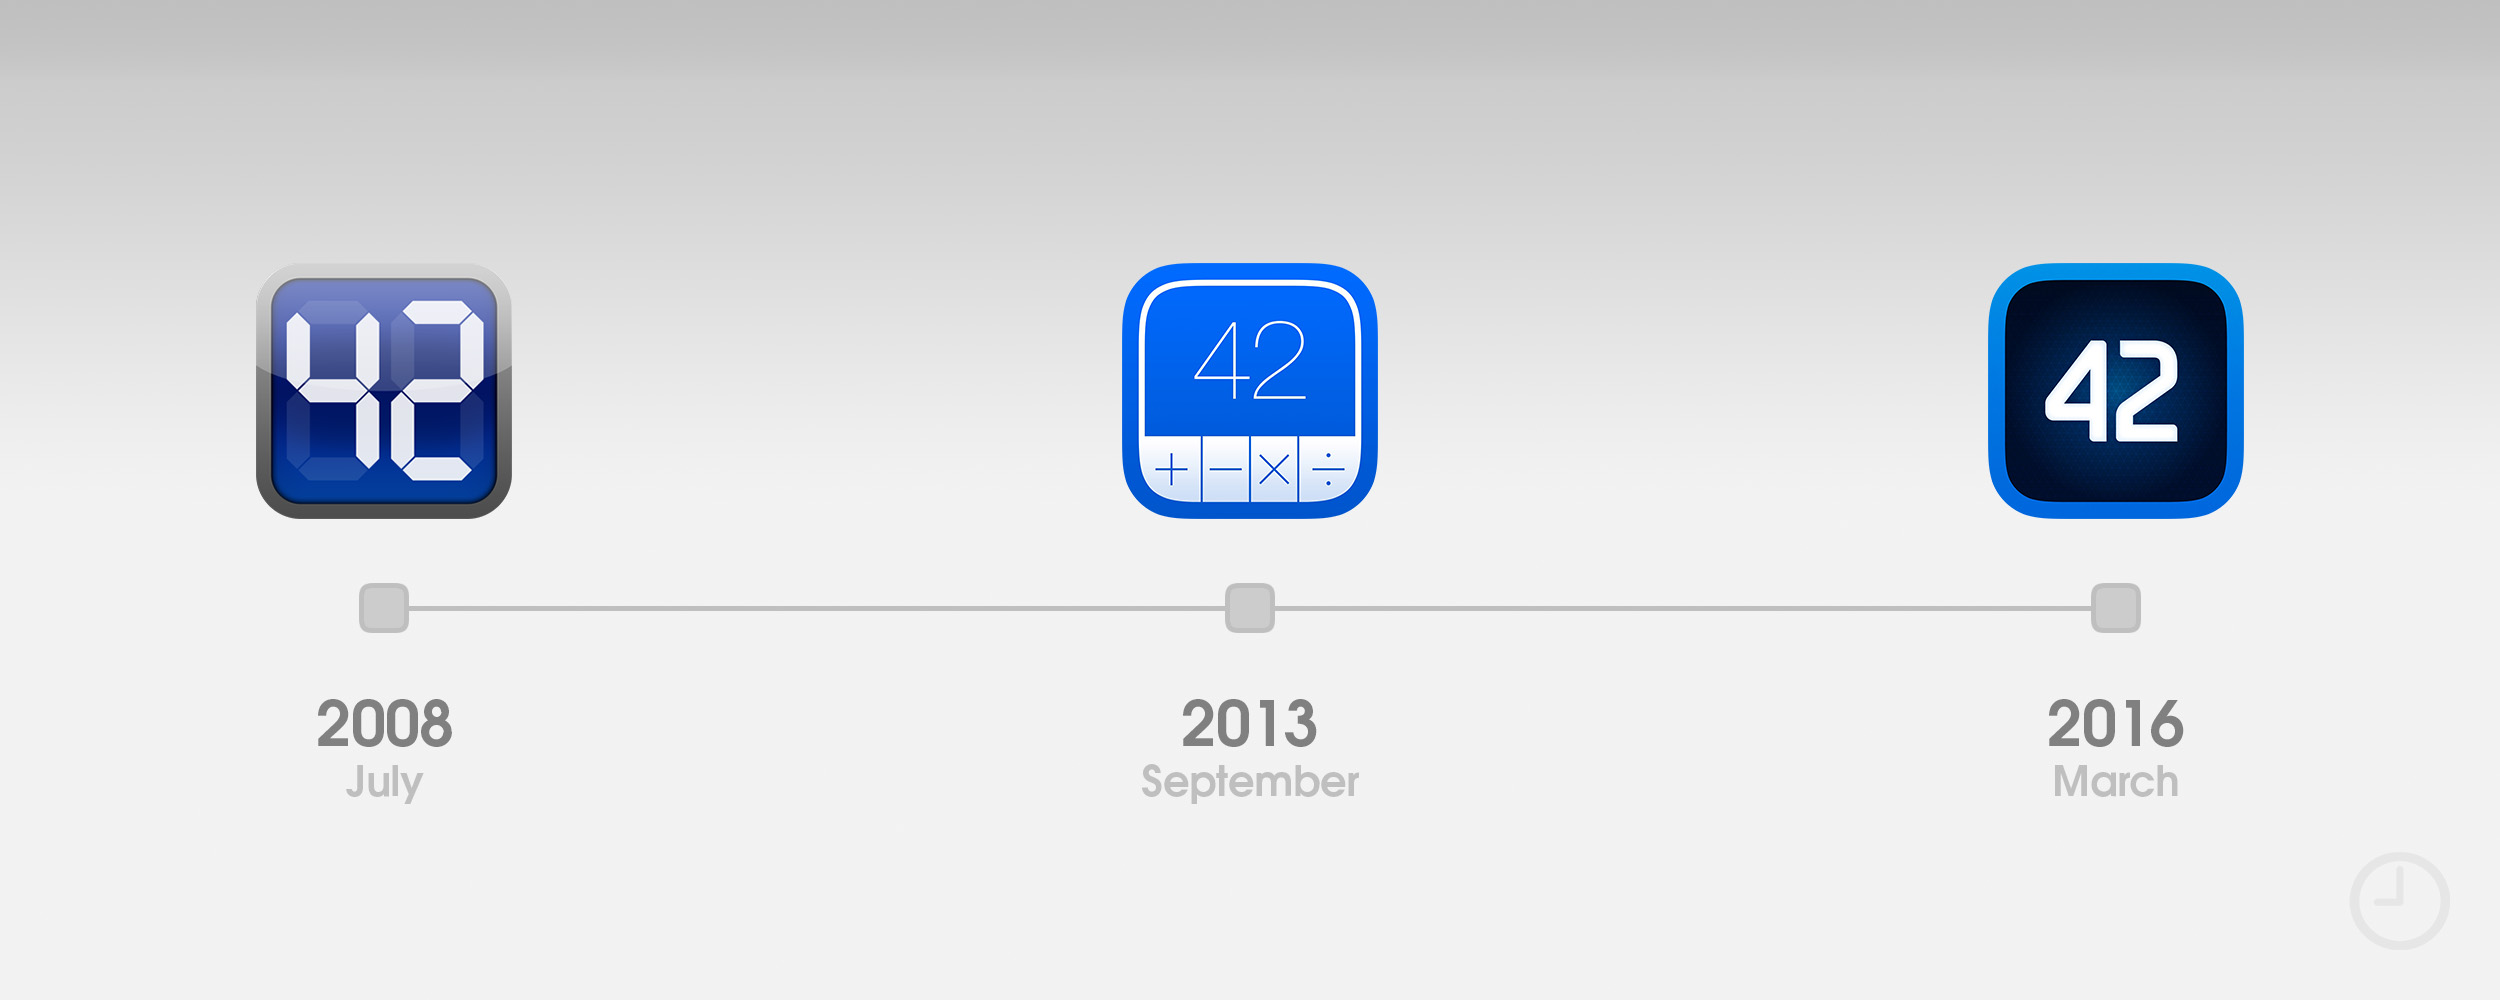 10 Years Of The App Store The Design Evolution Of The Earliest Apps 9to5mac